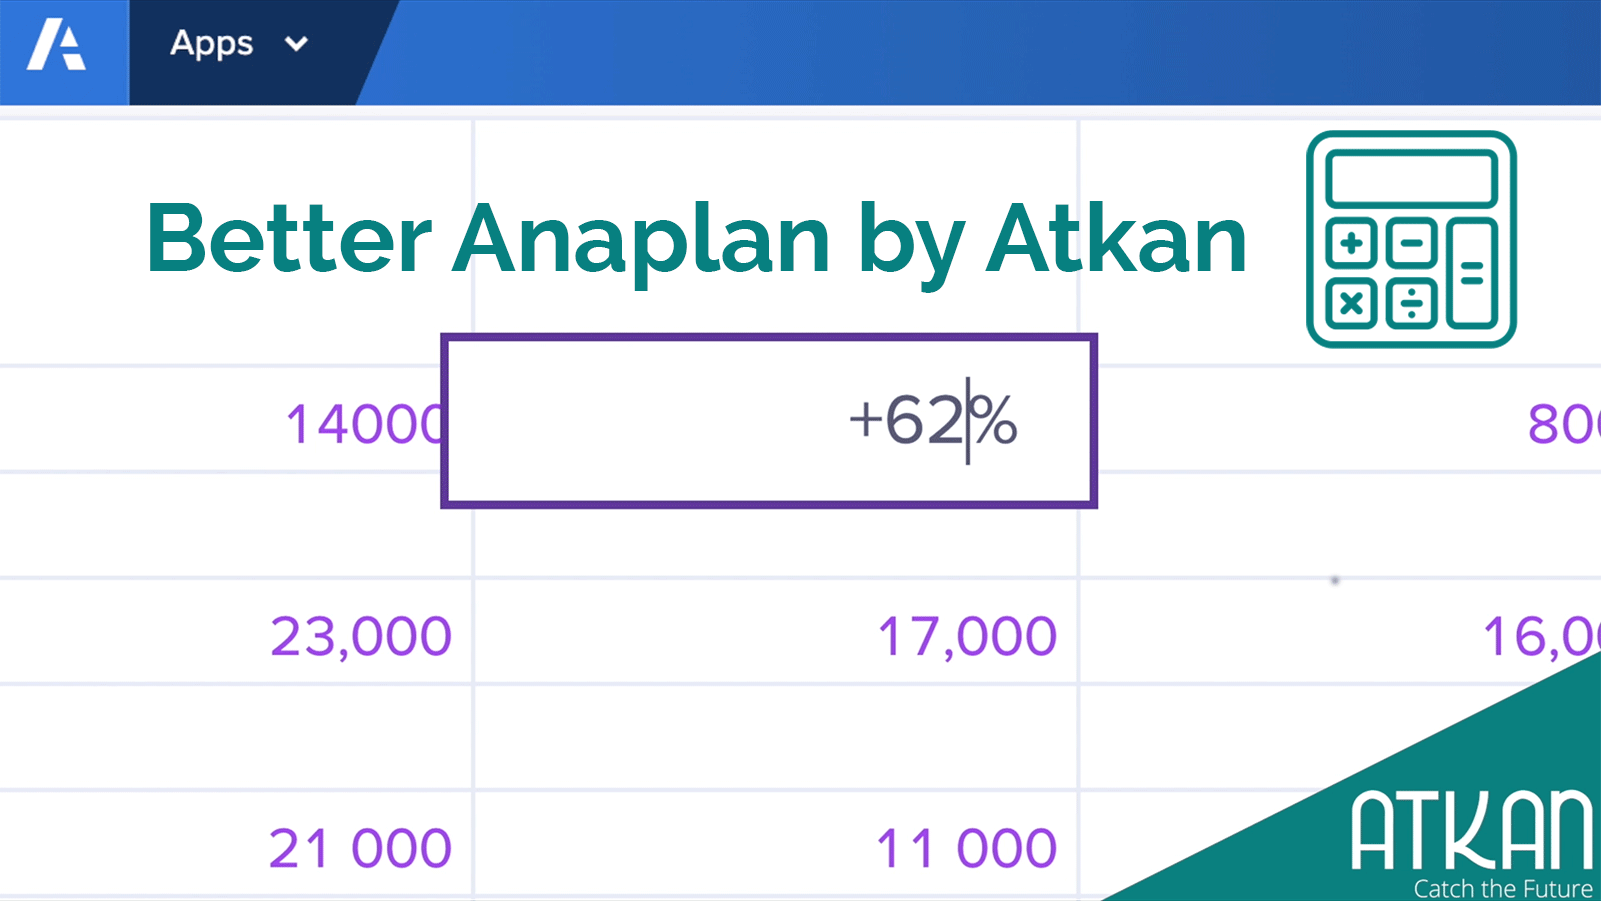 Better Anaplan by Atkan